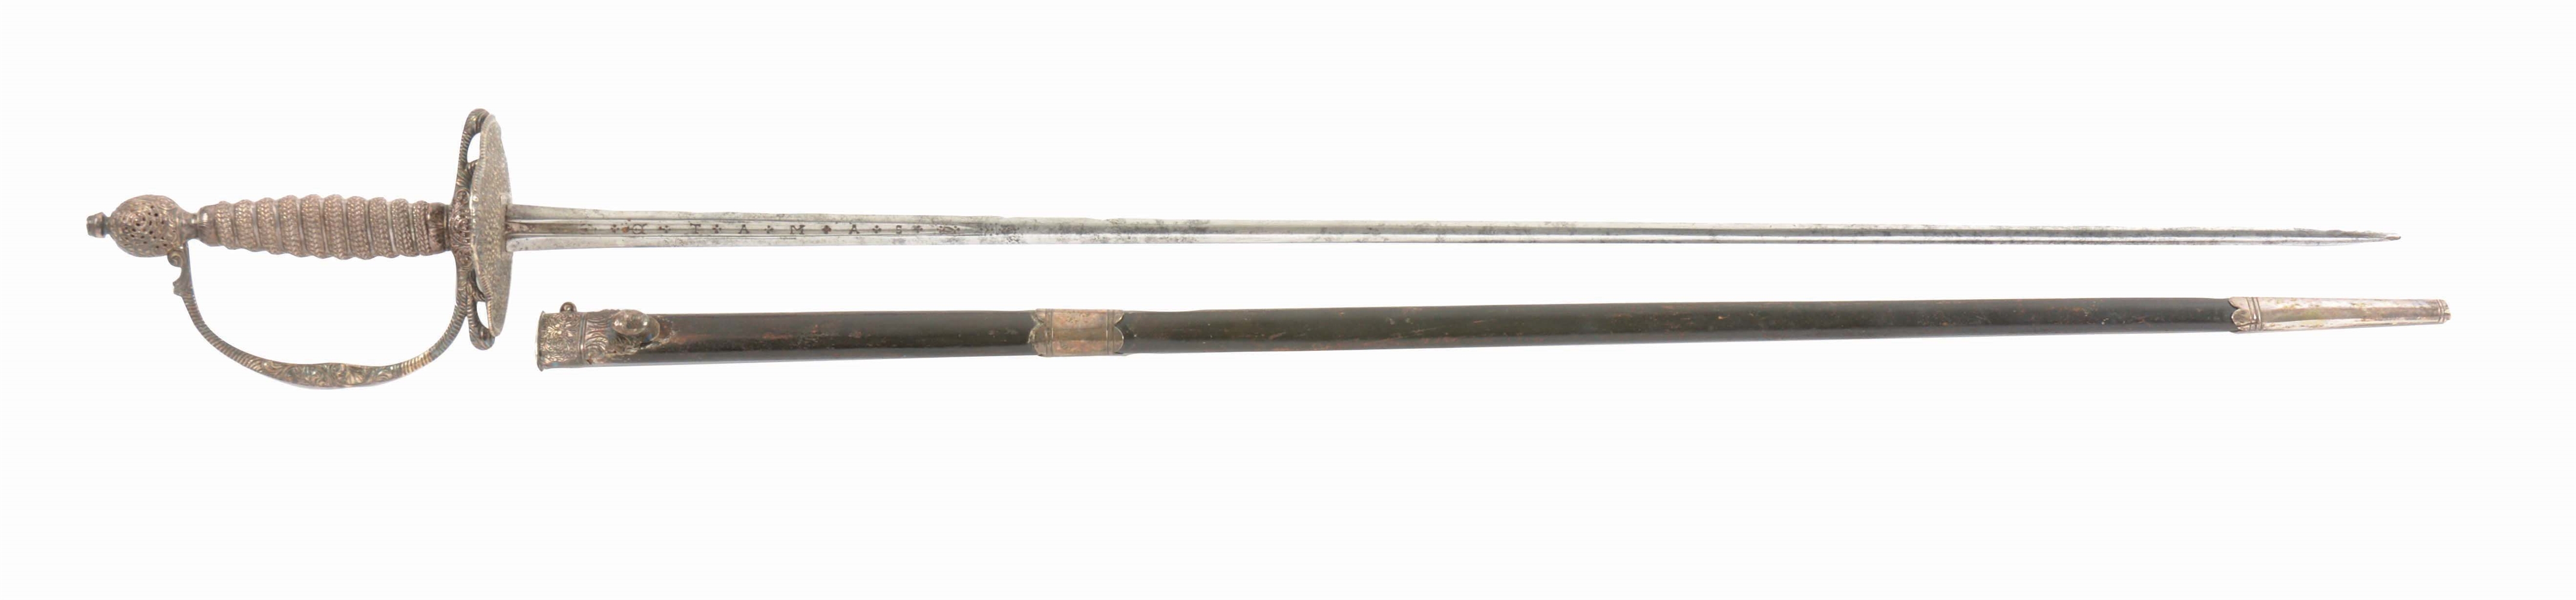 EXQUISITE ENGLISH PIERCED SILVER-HILTED SMALL SWORD AND SCABBARD BY BLAND, HALLMARKED FOR 1767.